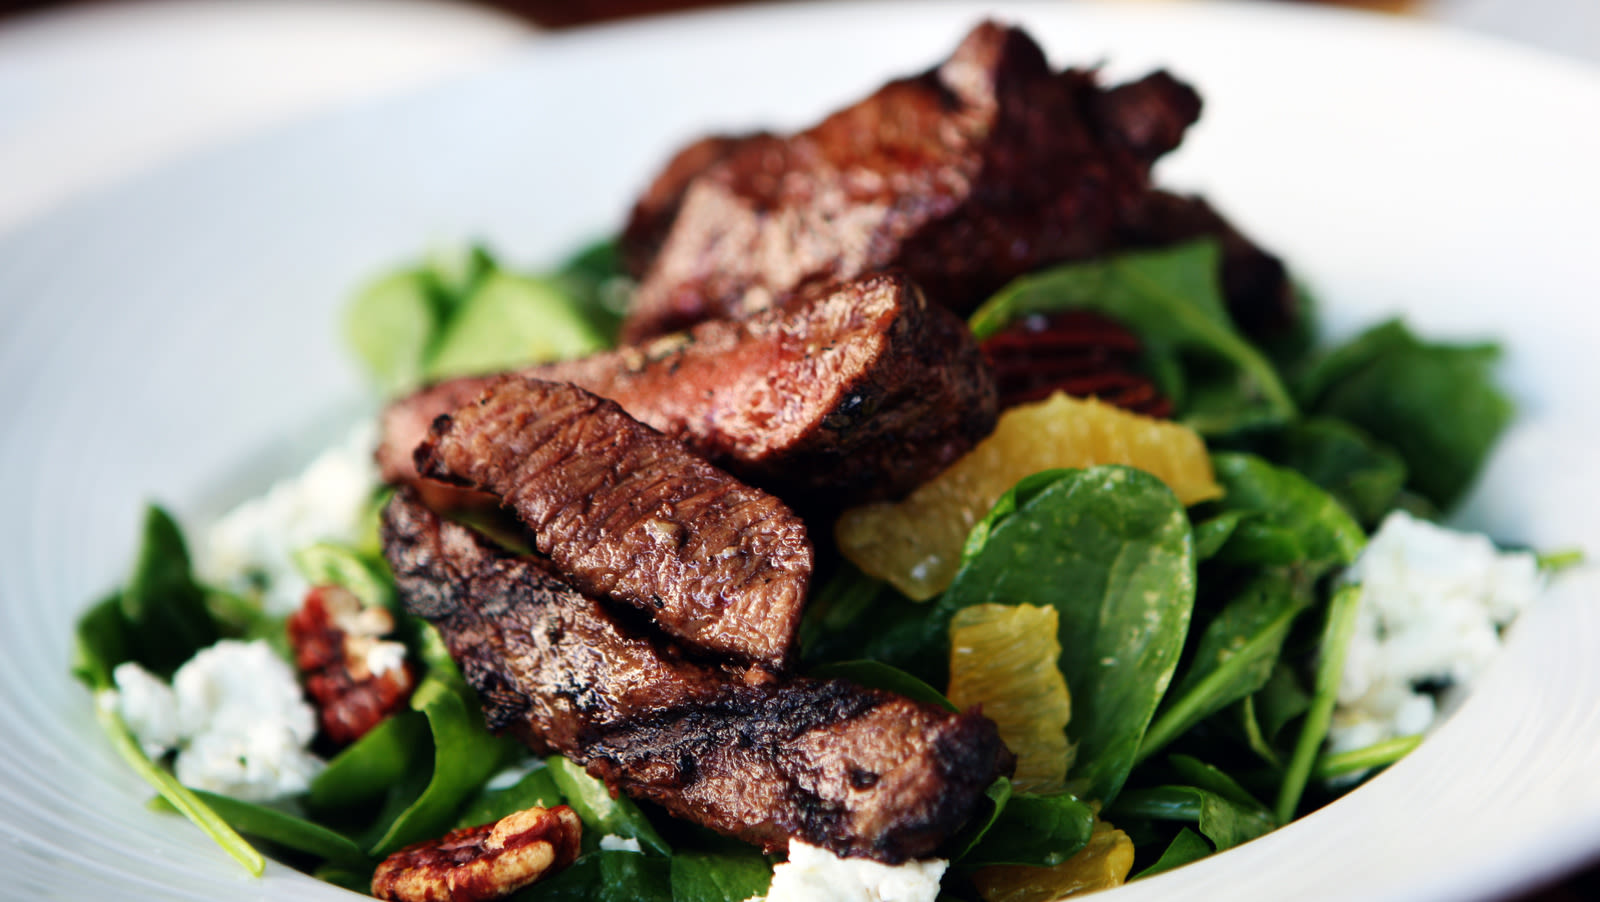 This Is The Best Cut Of Steak For Salads, According To An Executive Chef